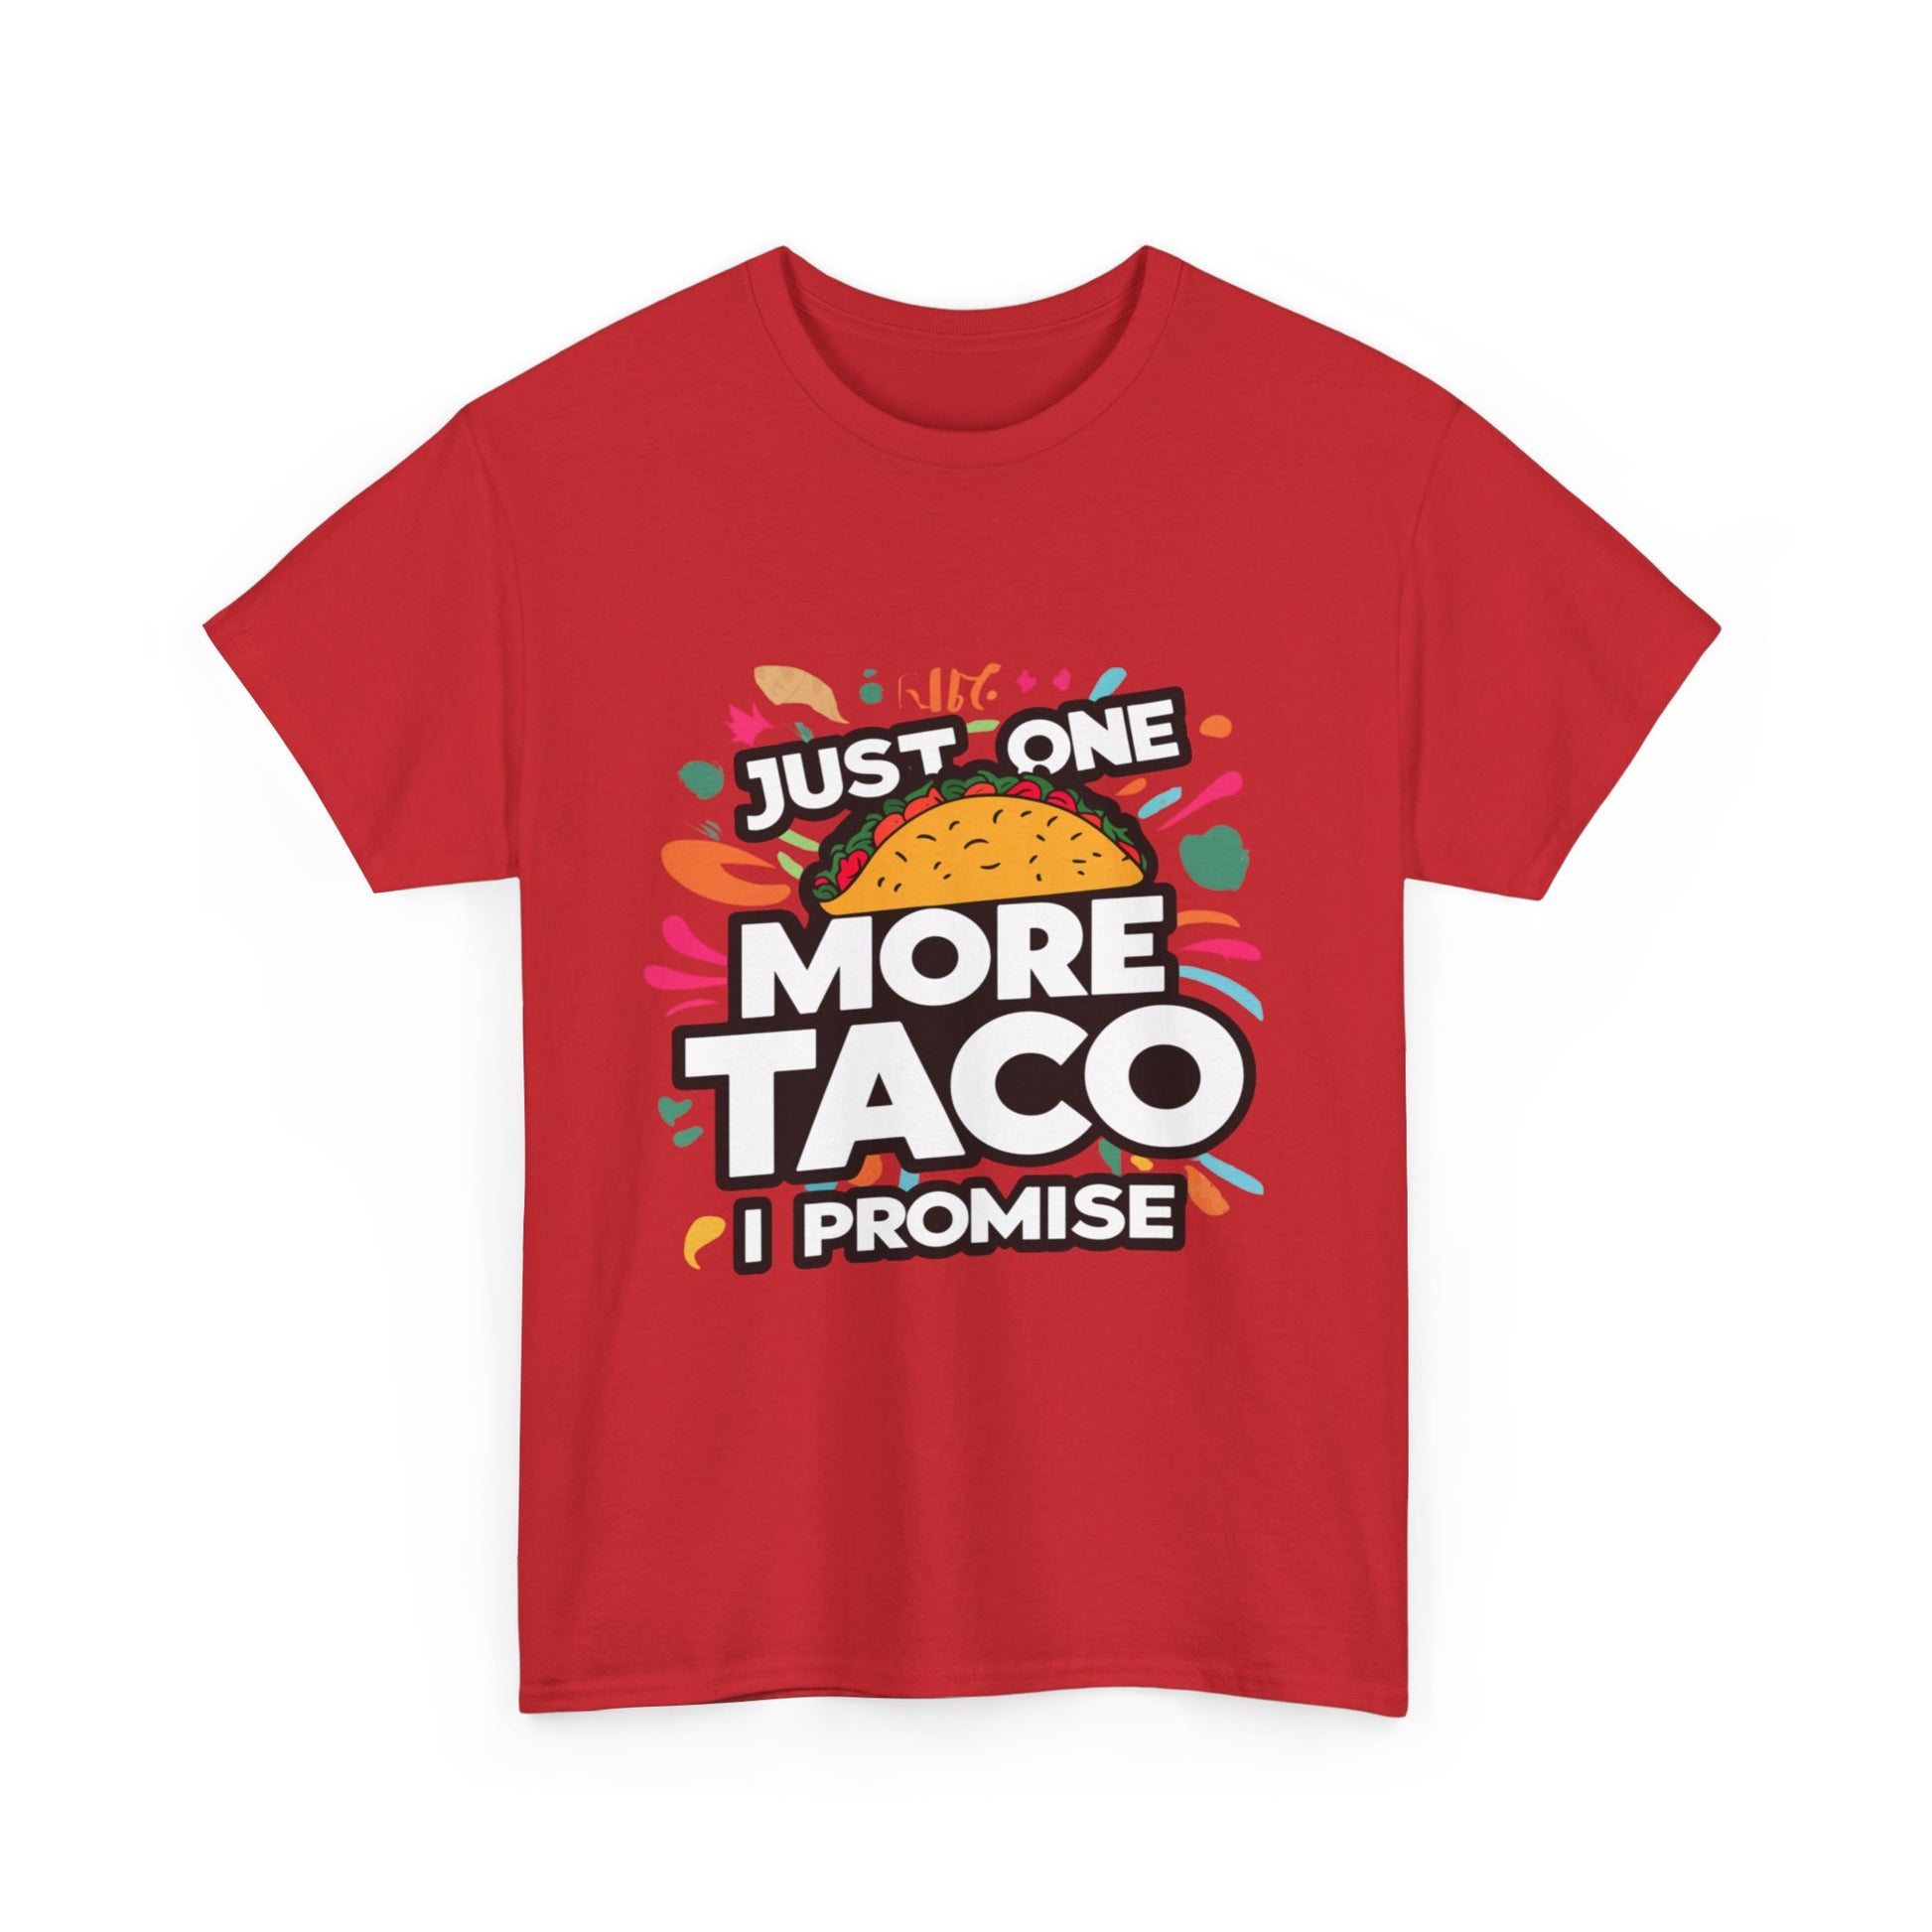 Just One More Taco I Promise Mexican Food Graphic Unisex Heavy Cotton Tee Cotton Funny Humorous Graphic Soft Premium Unisex Men Women Red T-shirt Birthday Gift-33